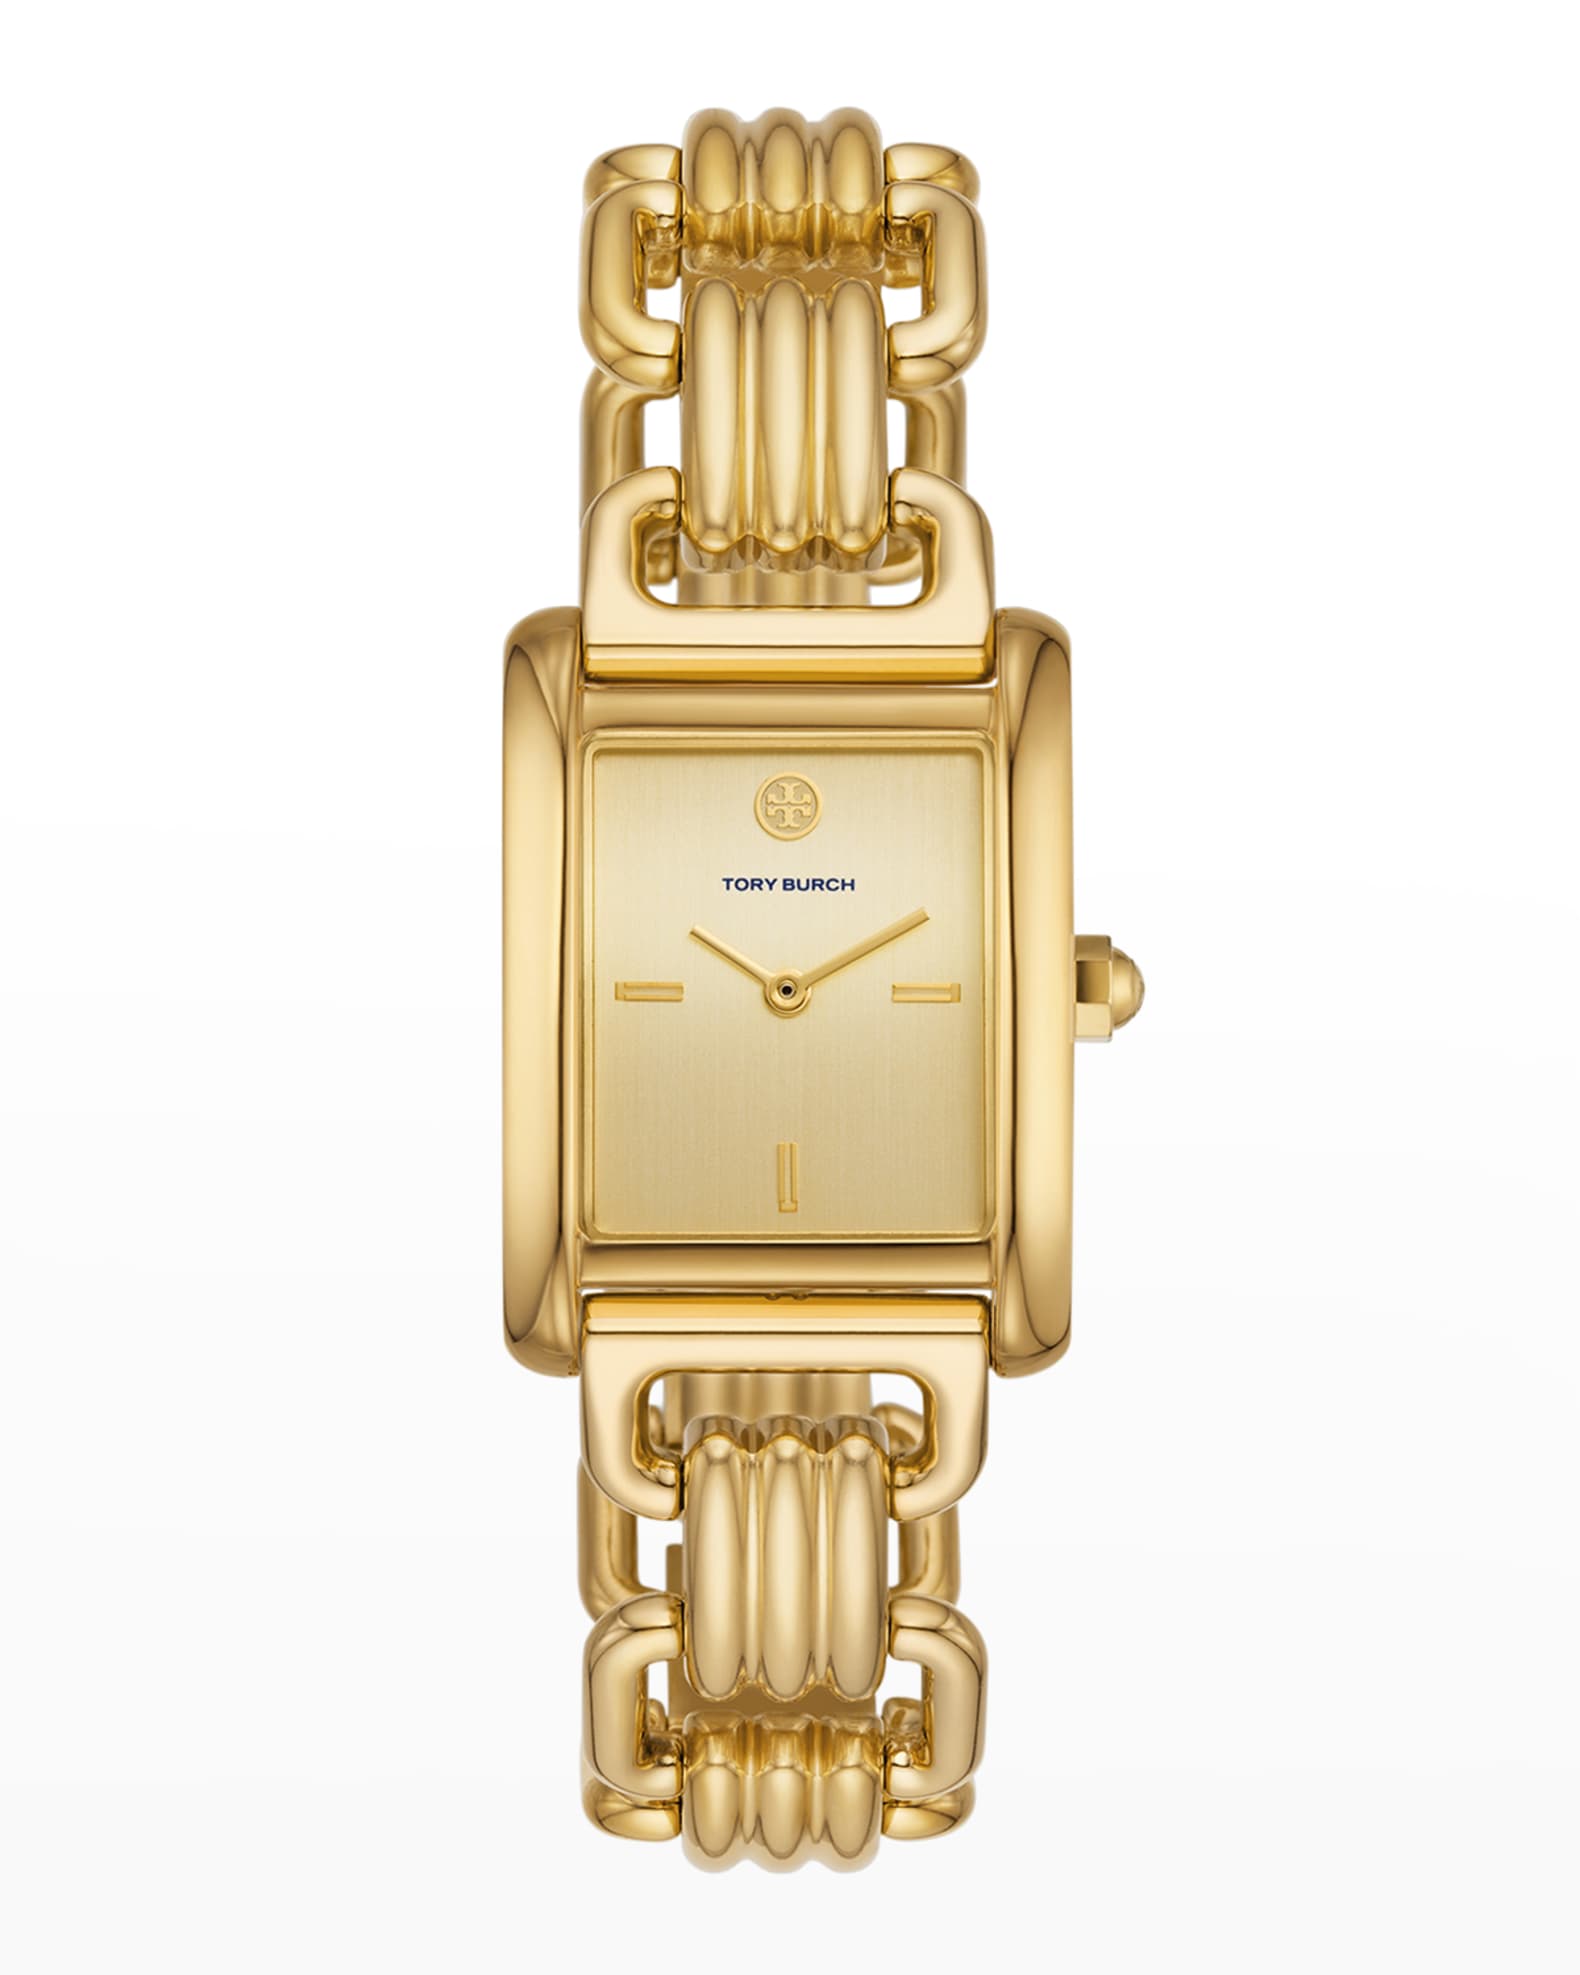 Tory Burch The Eleanor Watch with Bracelet Strap, Gold-Tone Stainless Steel  | Neiman Marcus